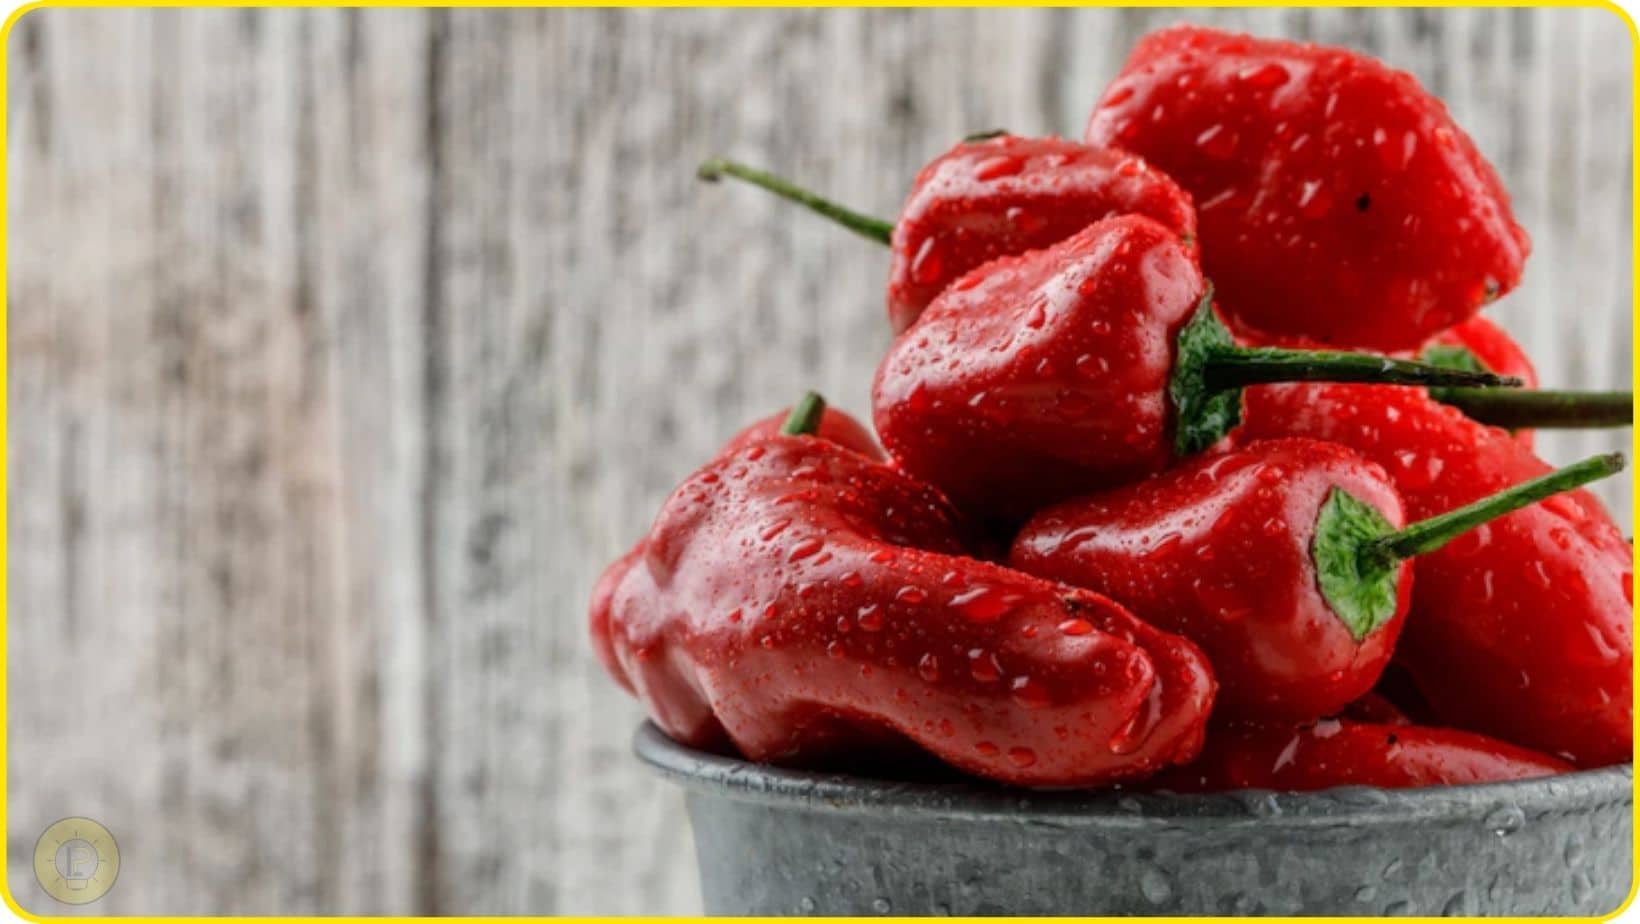 Health Benefits of Red Bell Peppers